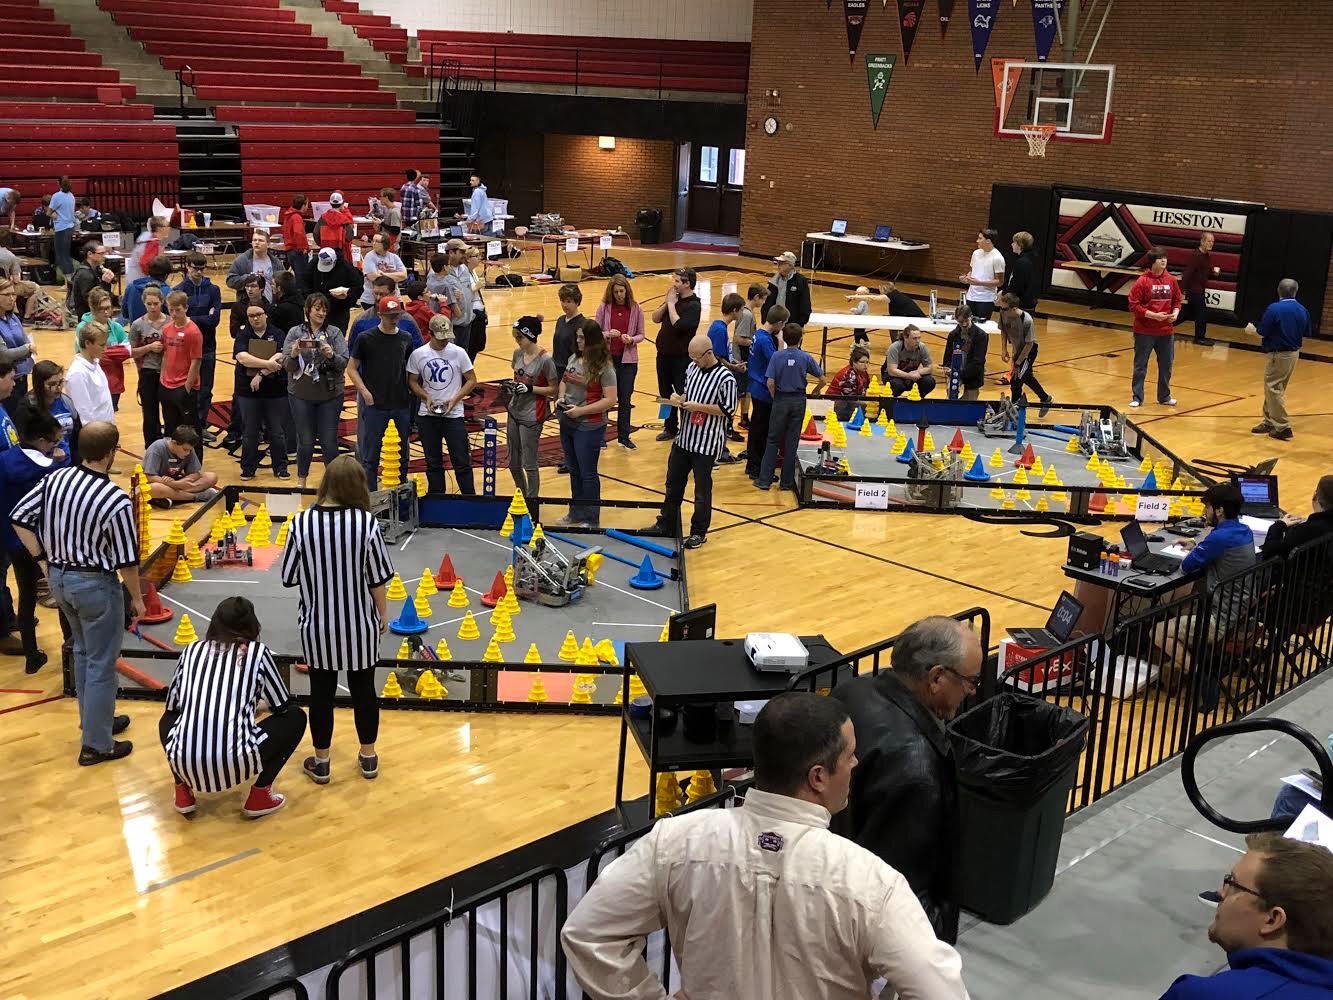 High school students compete at a regional VEX Robotics Competition in Hesston in November. The state-qualifying VEX event will be held at WSU on Feb. 23, along with the state VEX IQ Challenge, an event for younger children.